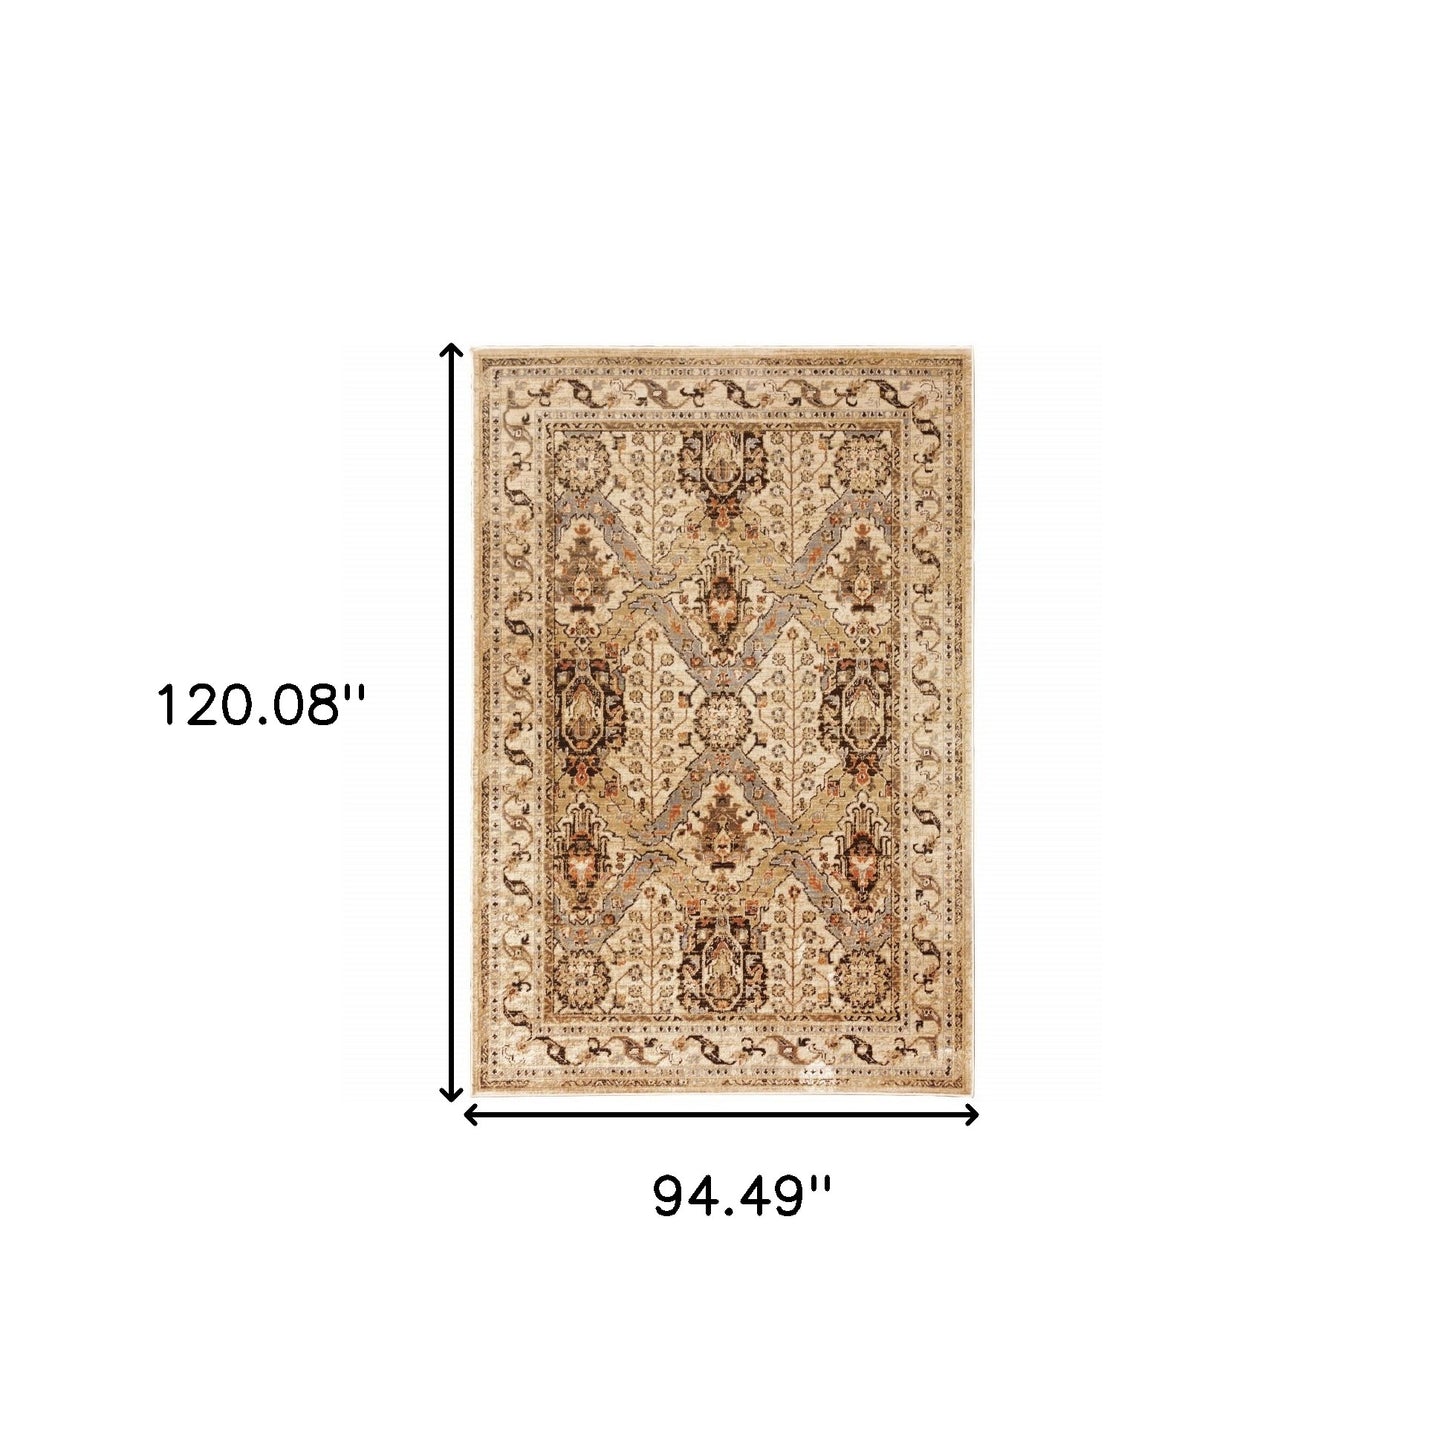 8' X 10' Beige Grey Dolphin Blue Deep Teal Gold And Orange Oriental Power Loom Stain Resistant Area Rug